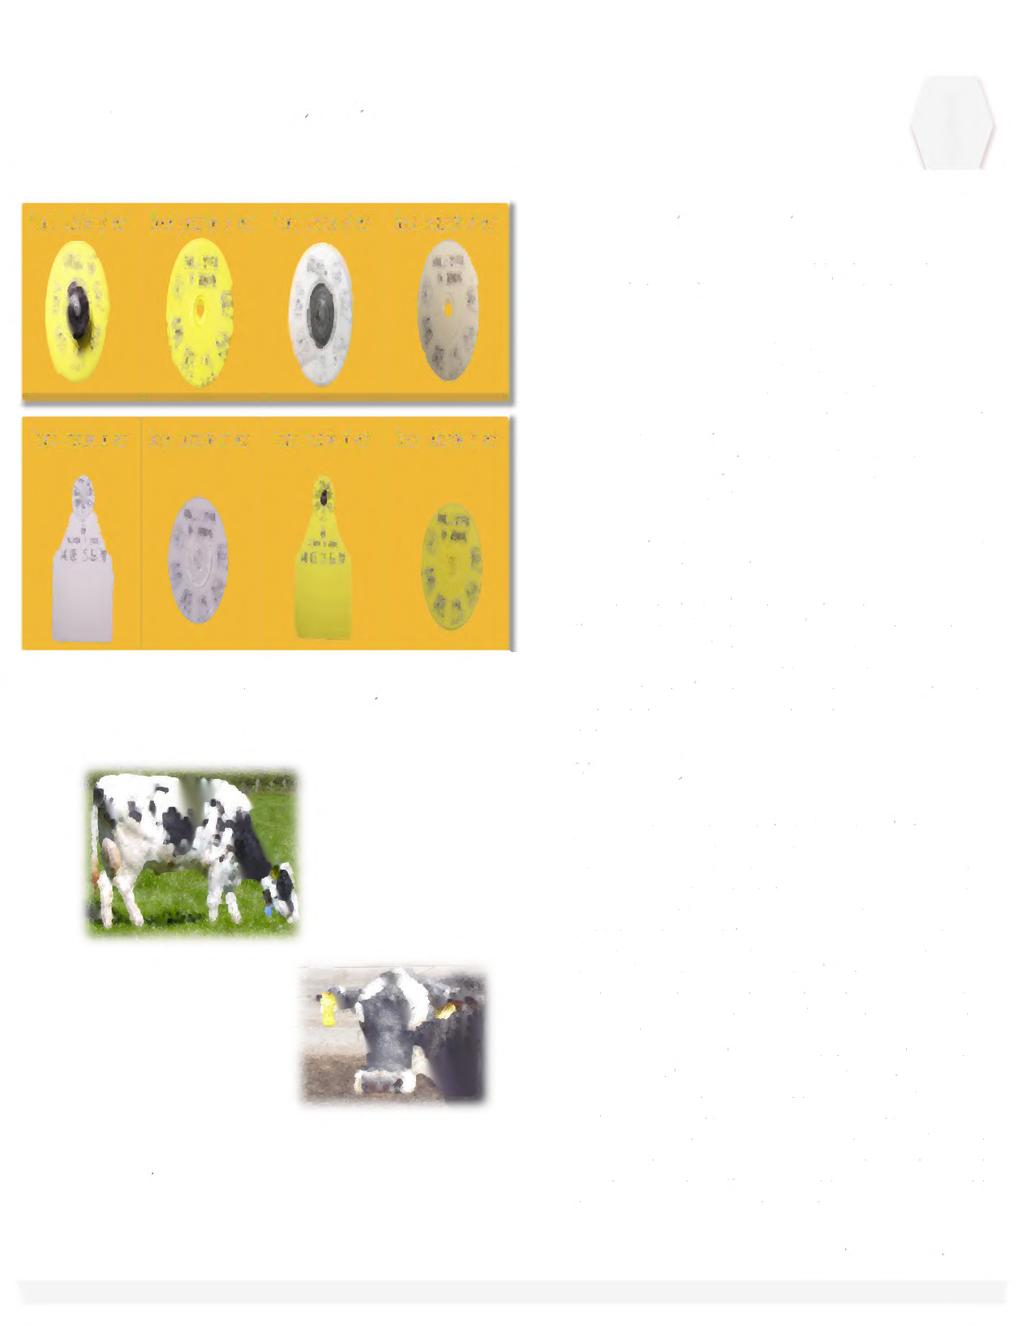 How the Technology Works t front (inside of ear) M (outside of ear) front (inside of ear) kk (outside of ear) Attaching RFID tag: mmi Cs UNUWl Si"", Focusing on the livestock industry, there are four